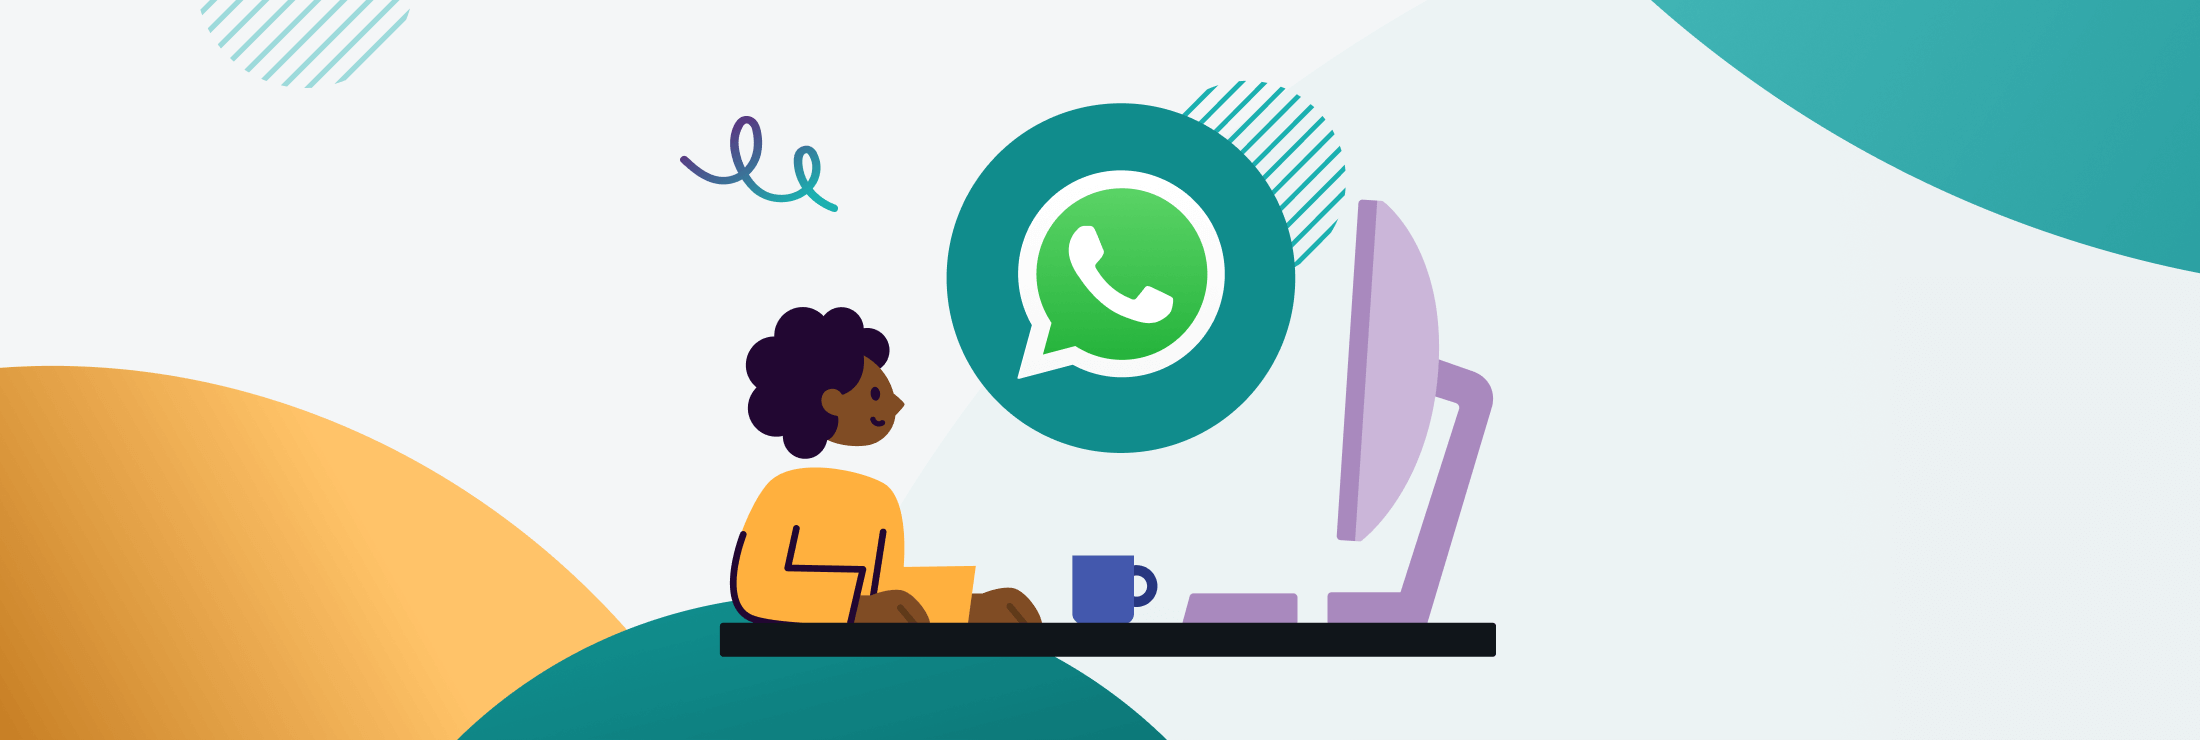 Image of a person using WhatsApp Business Platform on their computer